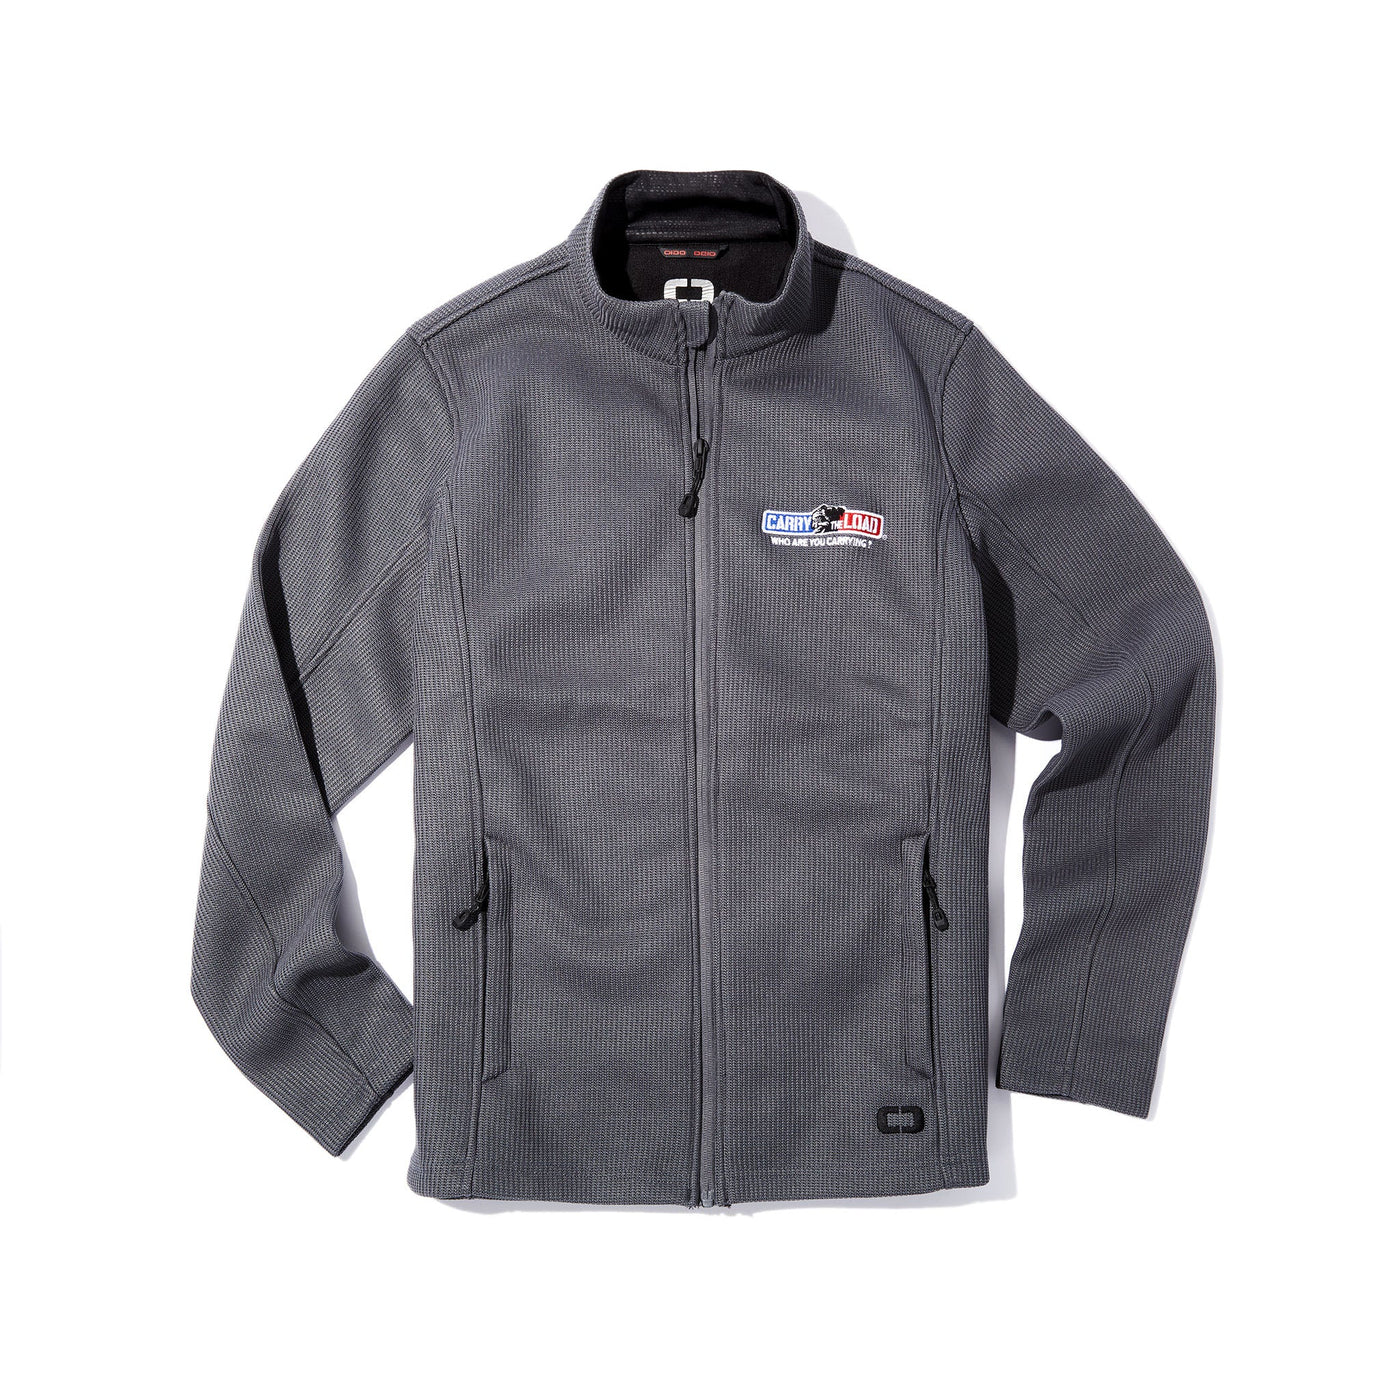 Rugged Cadet Collar Jacket - Carry the Load Shop